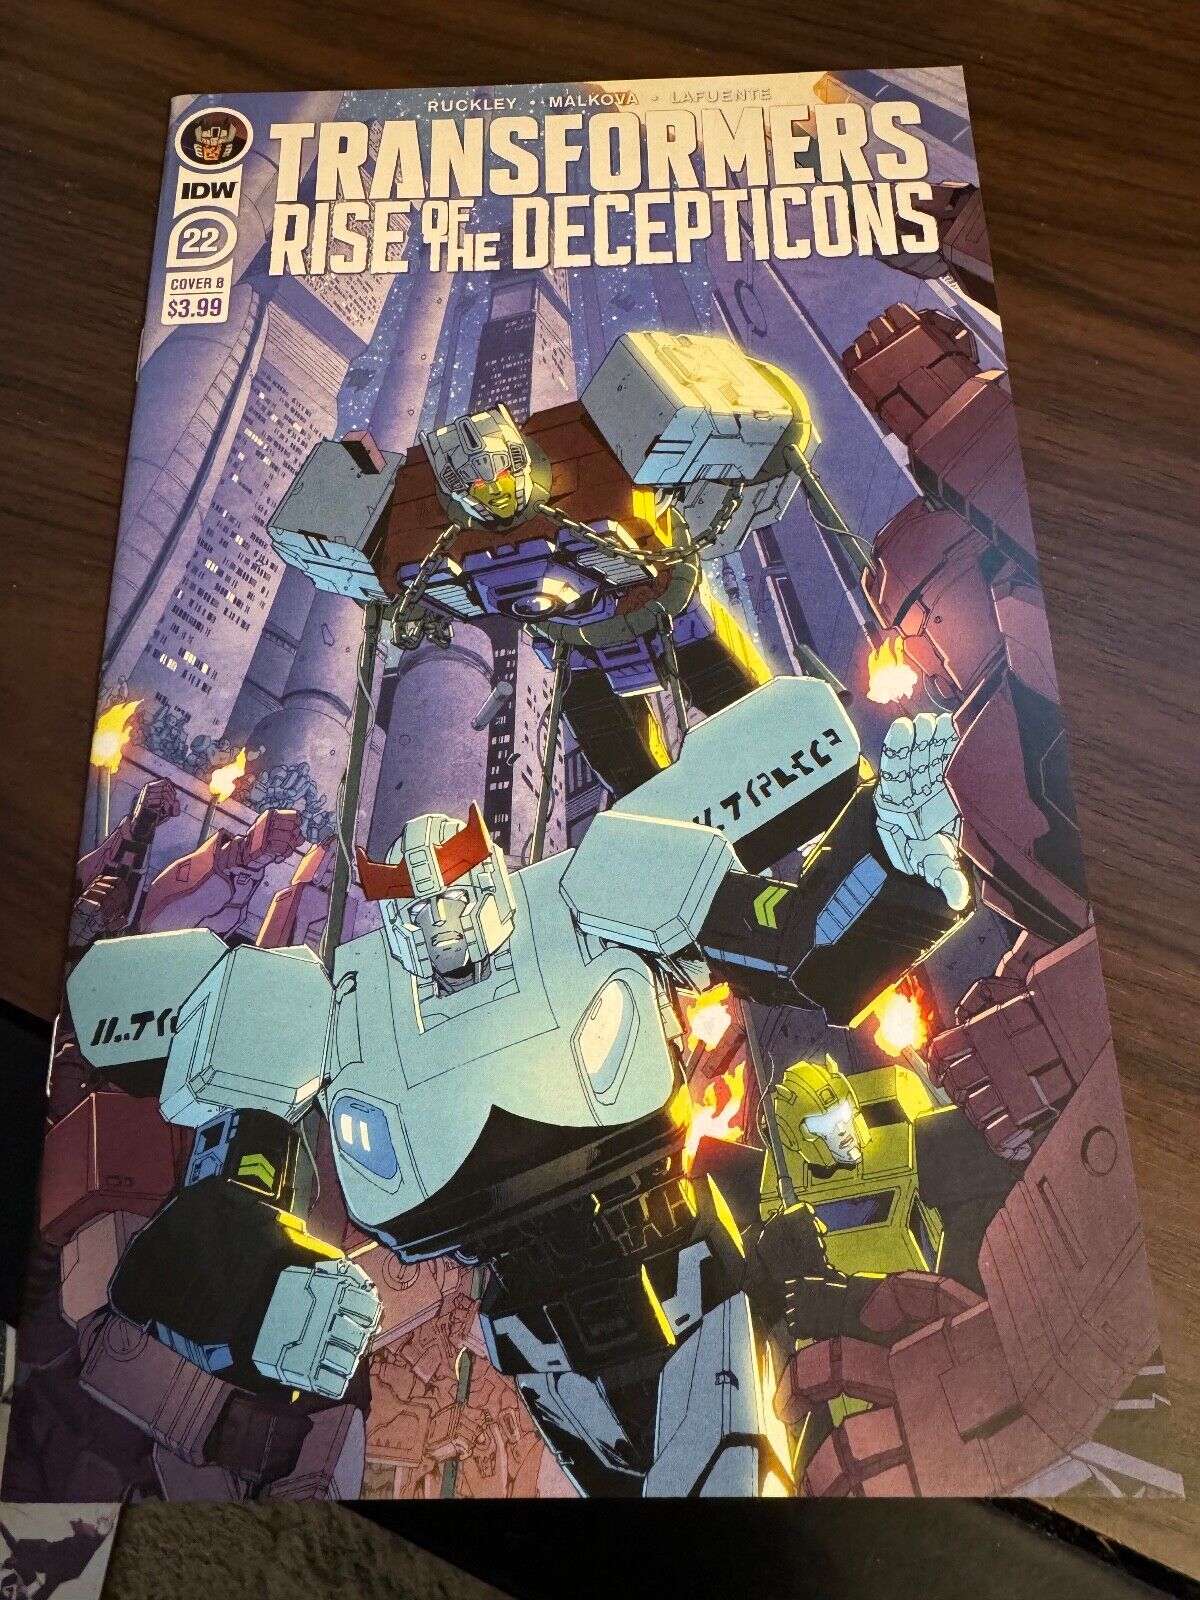 TRANSFORMERS RISE OF THE DECEPTICONS #22 COVER B IDW COMICS 2020